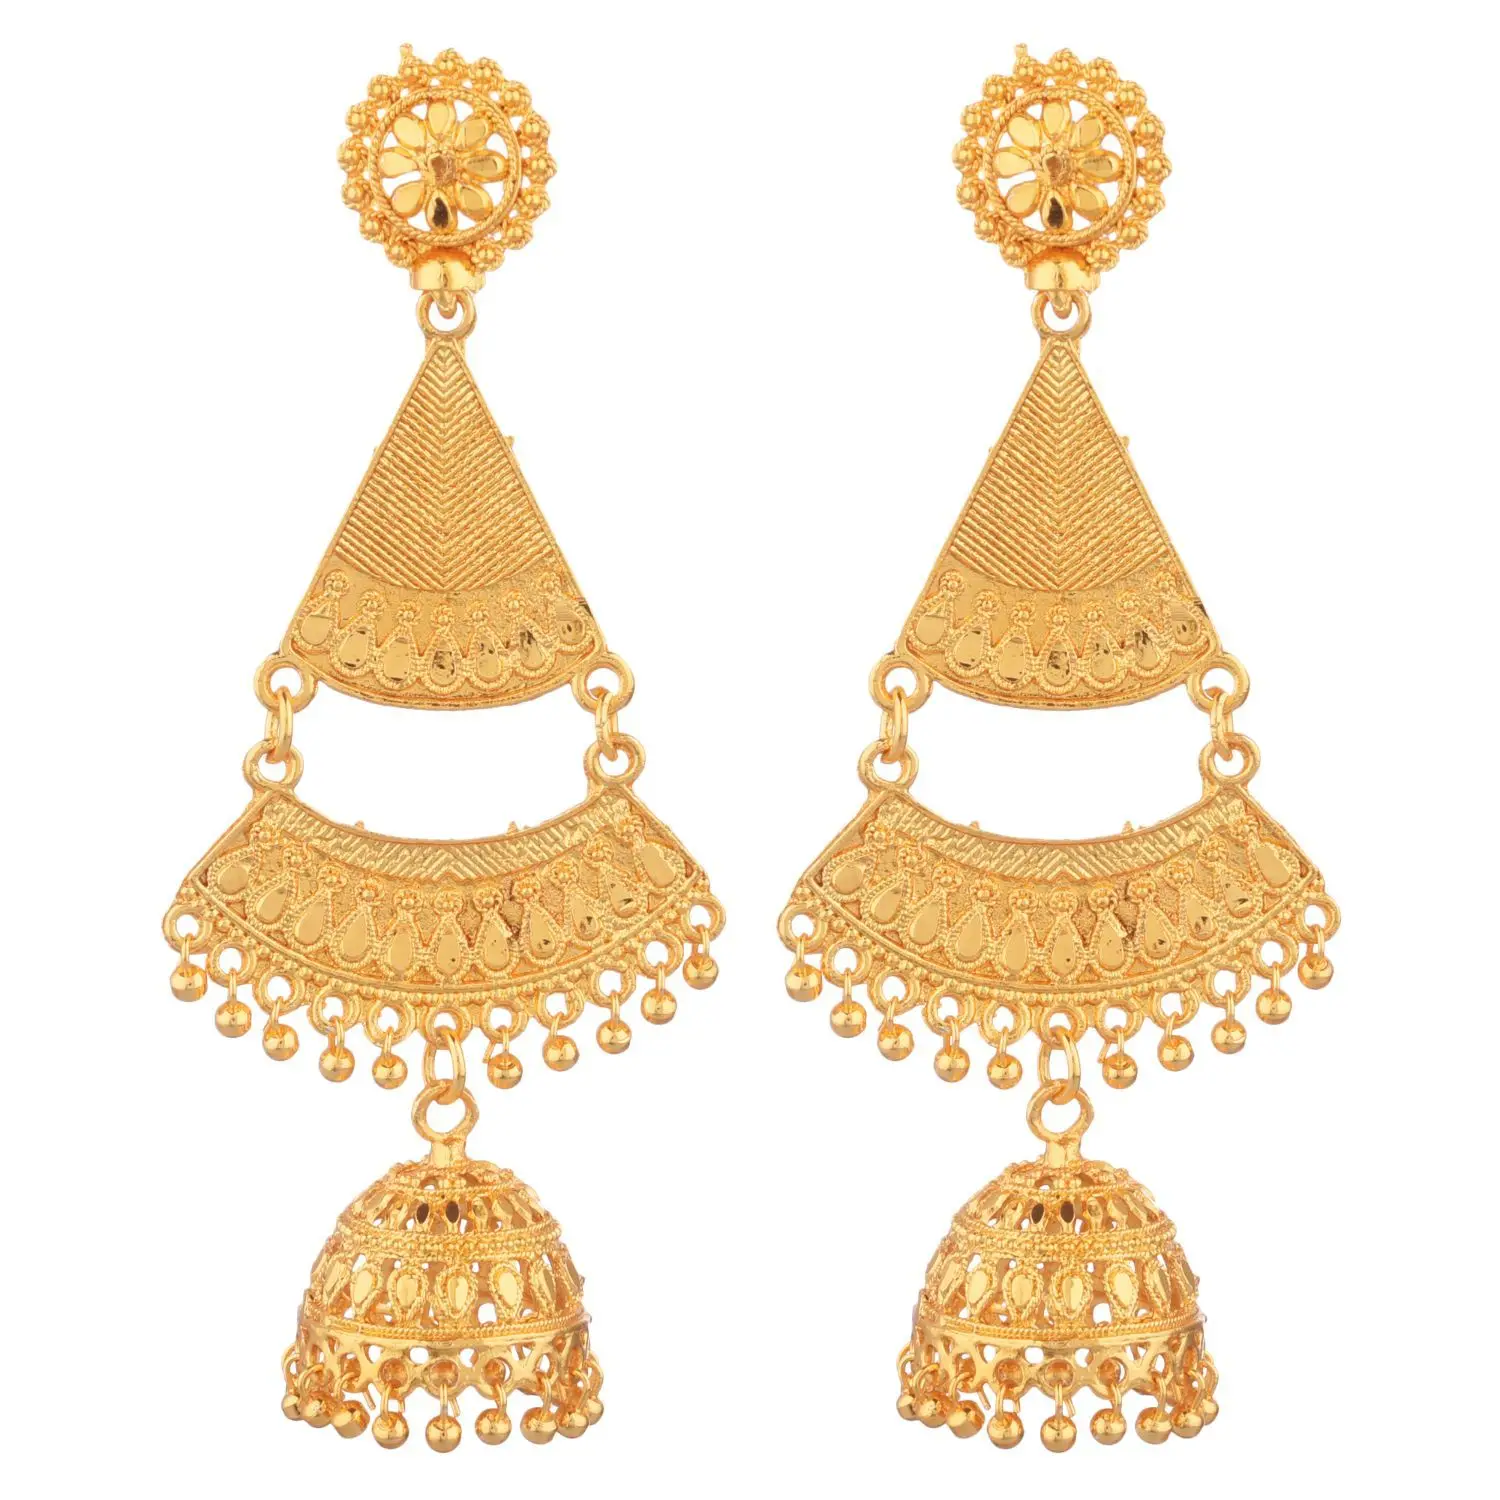 Buy CRUNCHY FASHION Retro Big Gold Jhumka With Black Beads Long Chain  Tassel Hangers Earrings Online at Best Prices in India  JioMart